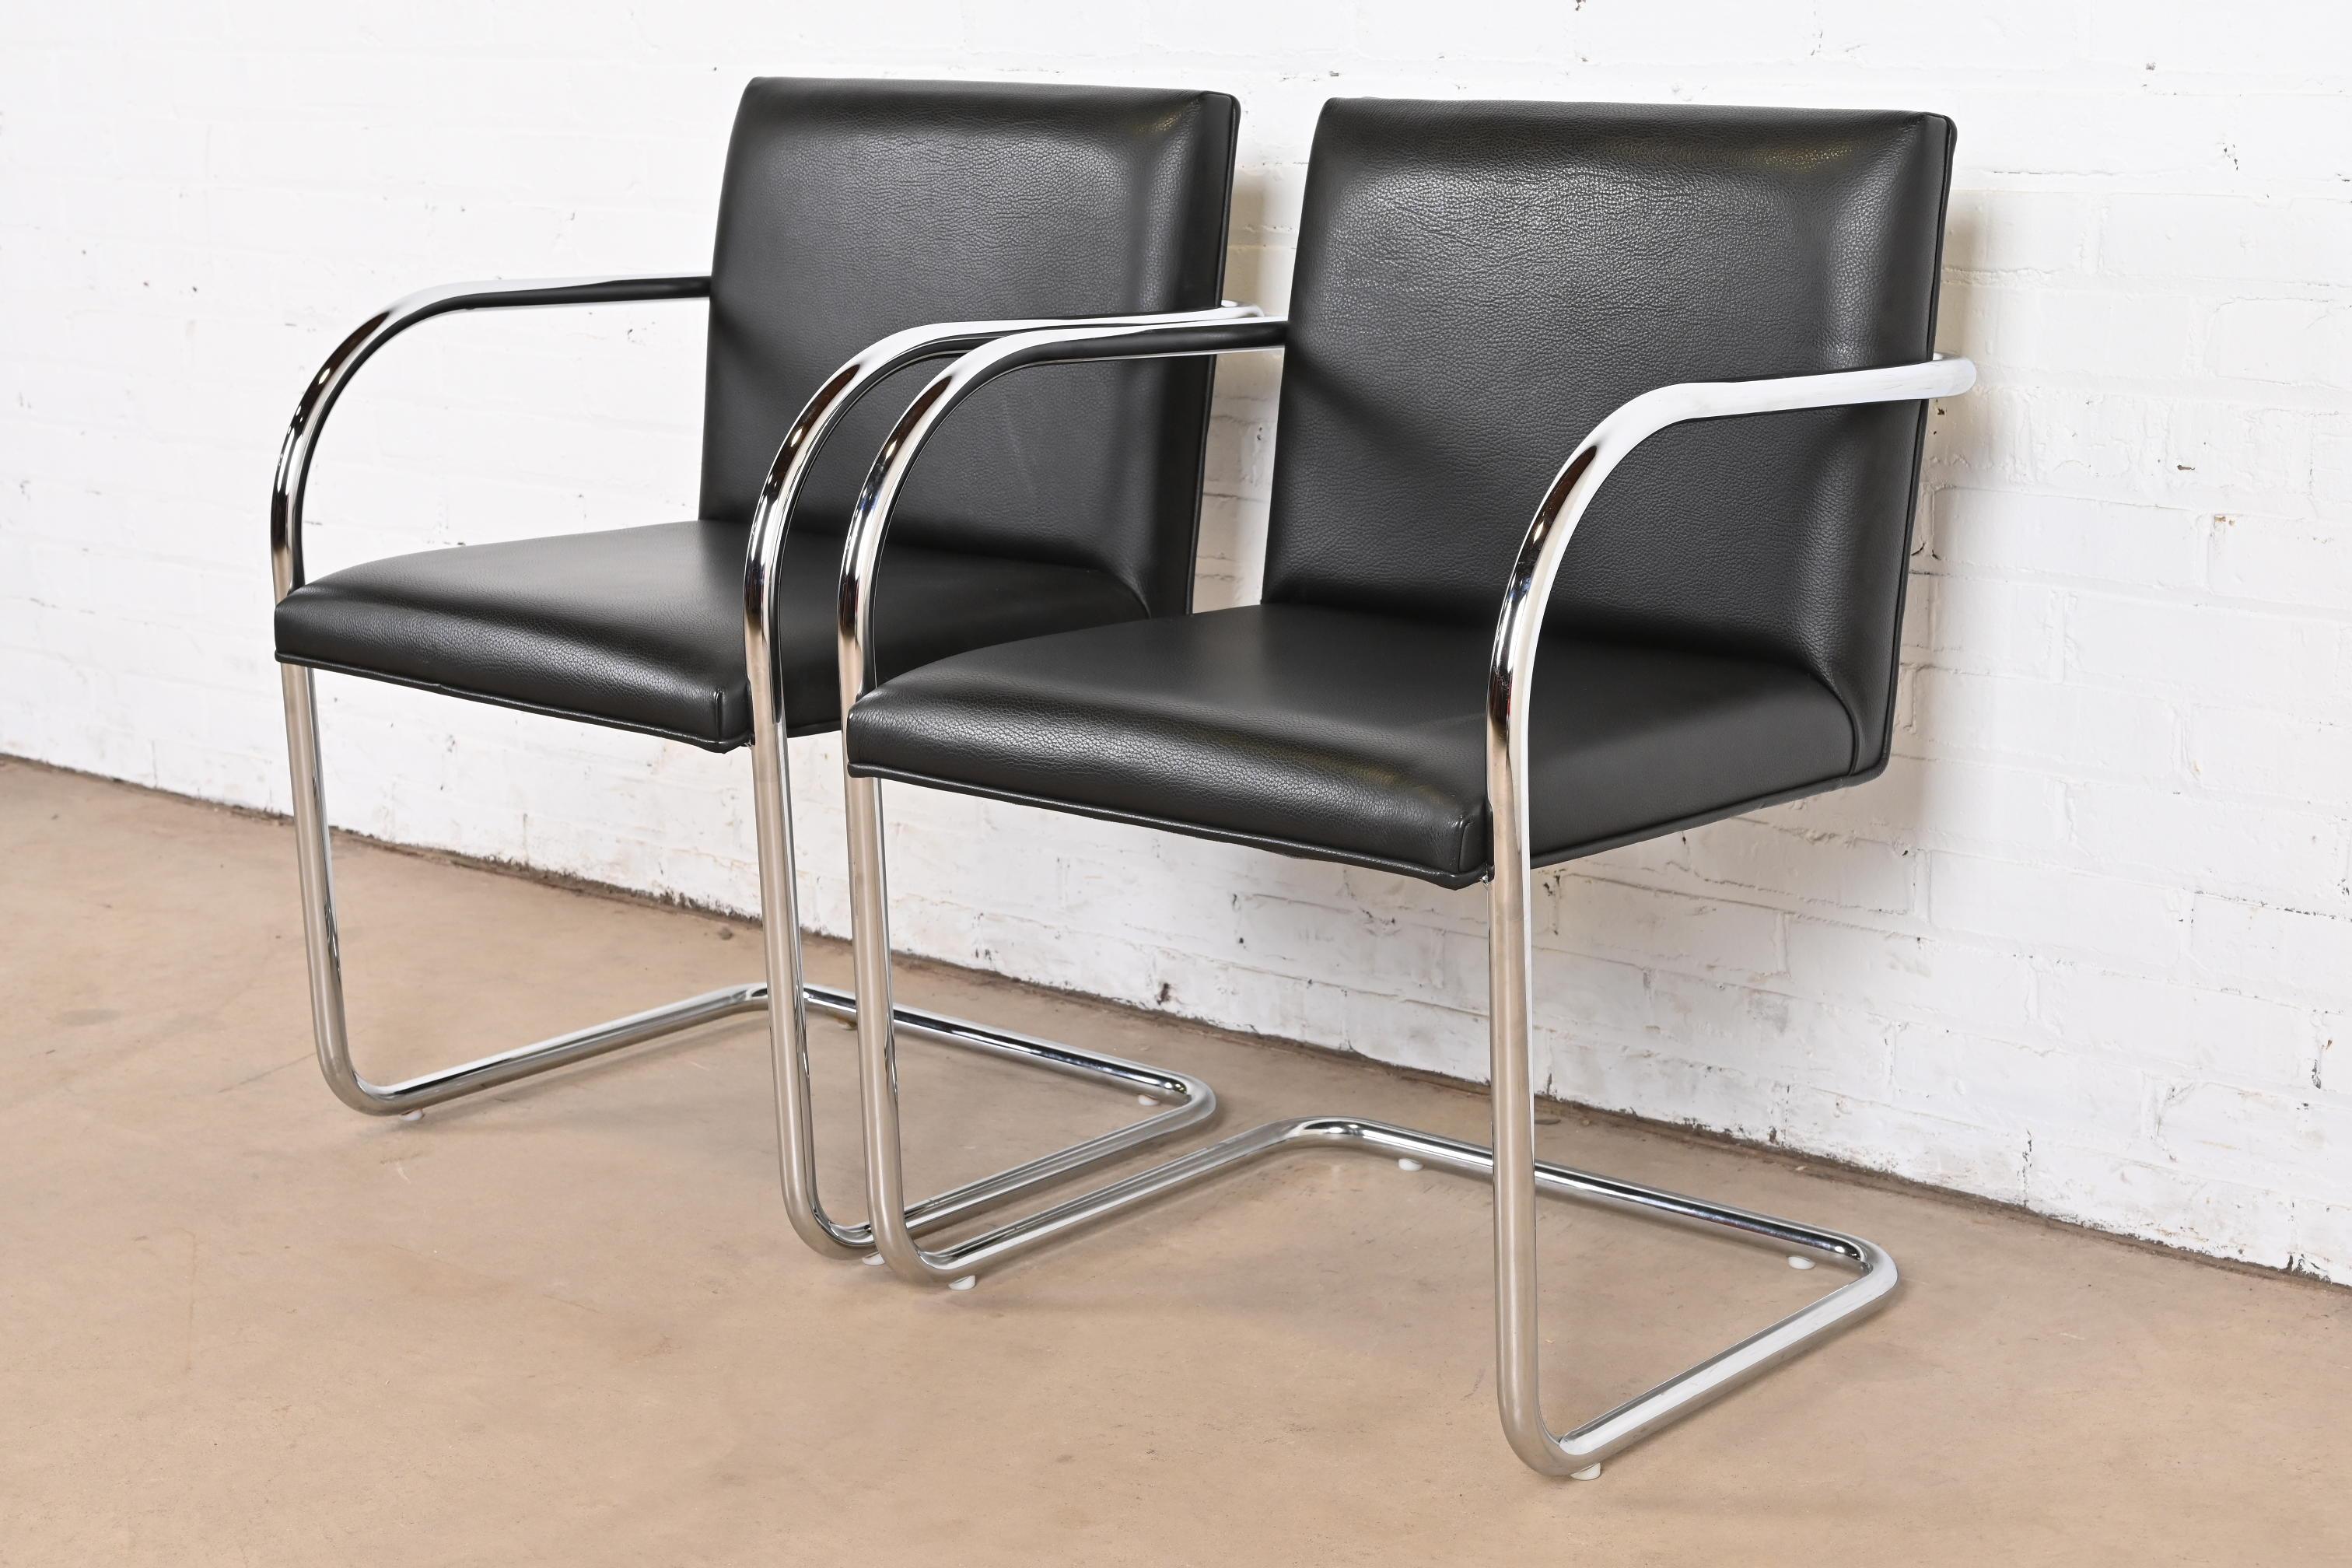 Mies Van Der Rohe Black Leather and Chrome Brno Chairs, Pair In Good Condition For Sale In South Bend, IN